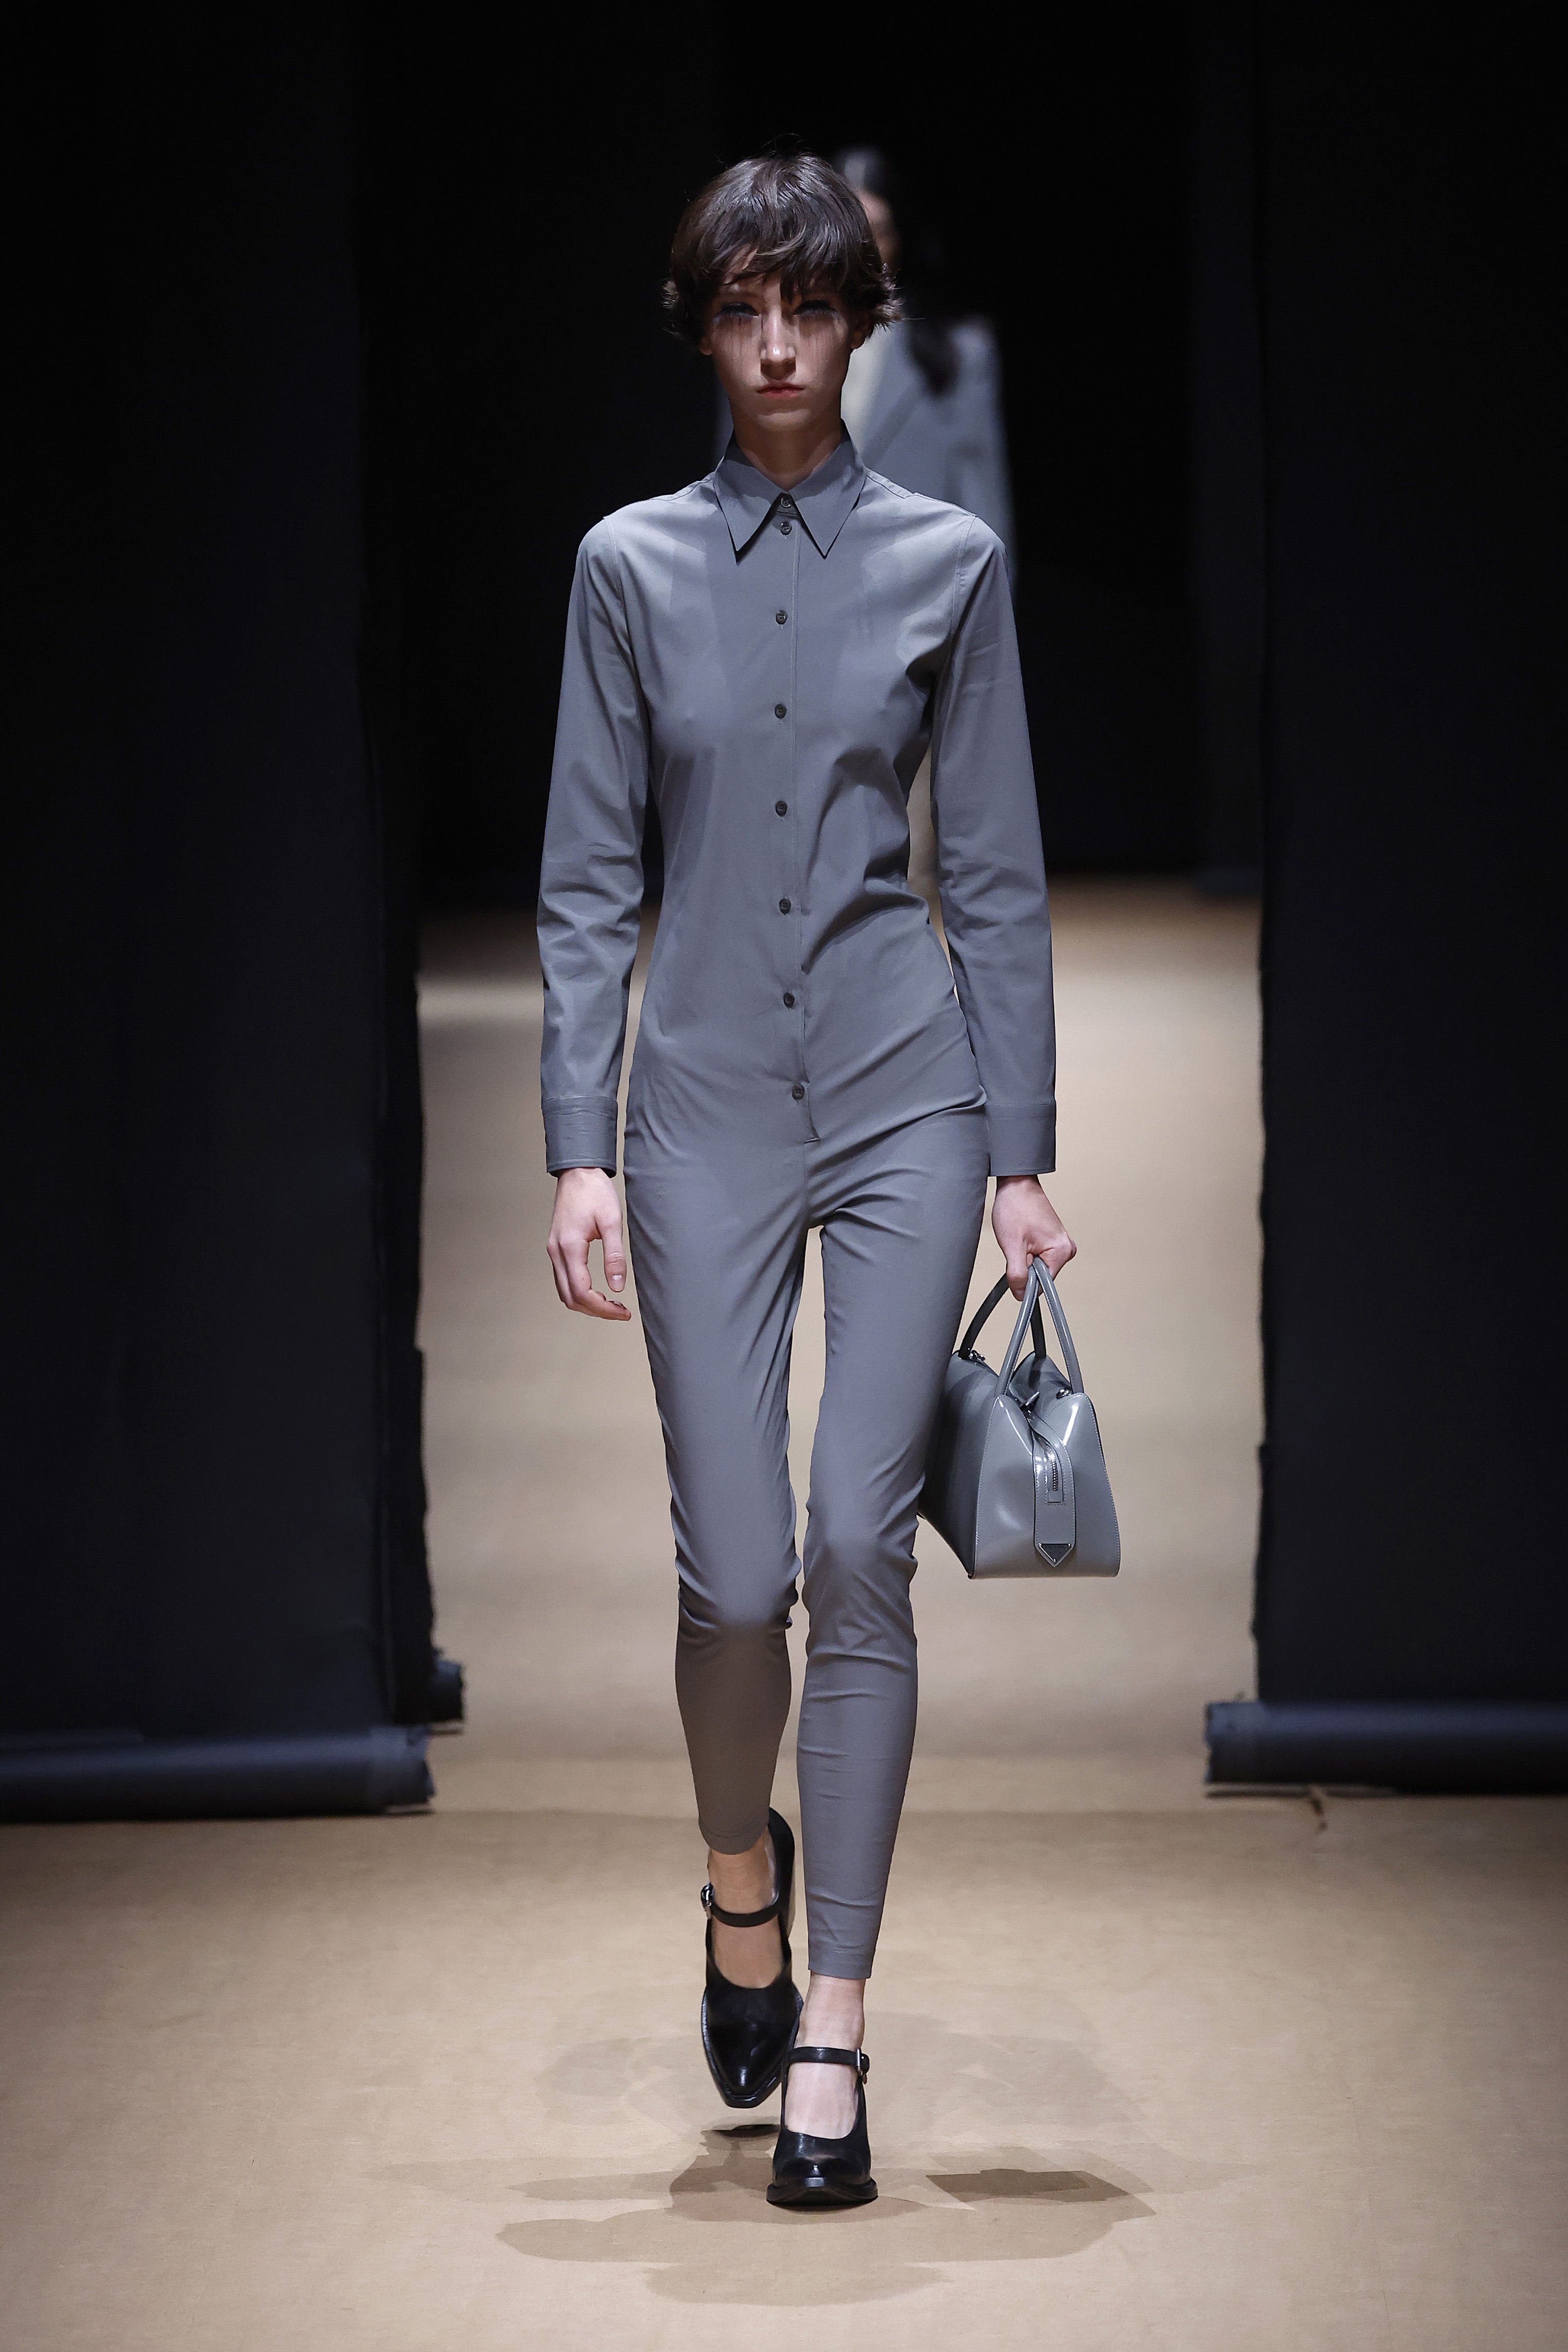 At Prada, Delicacy And Roughness Are Deftly Presented With Paper-Based ...